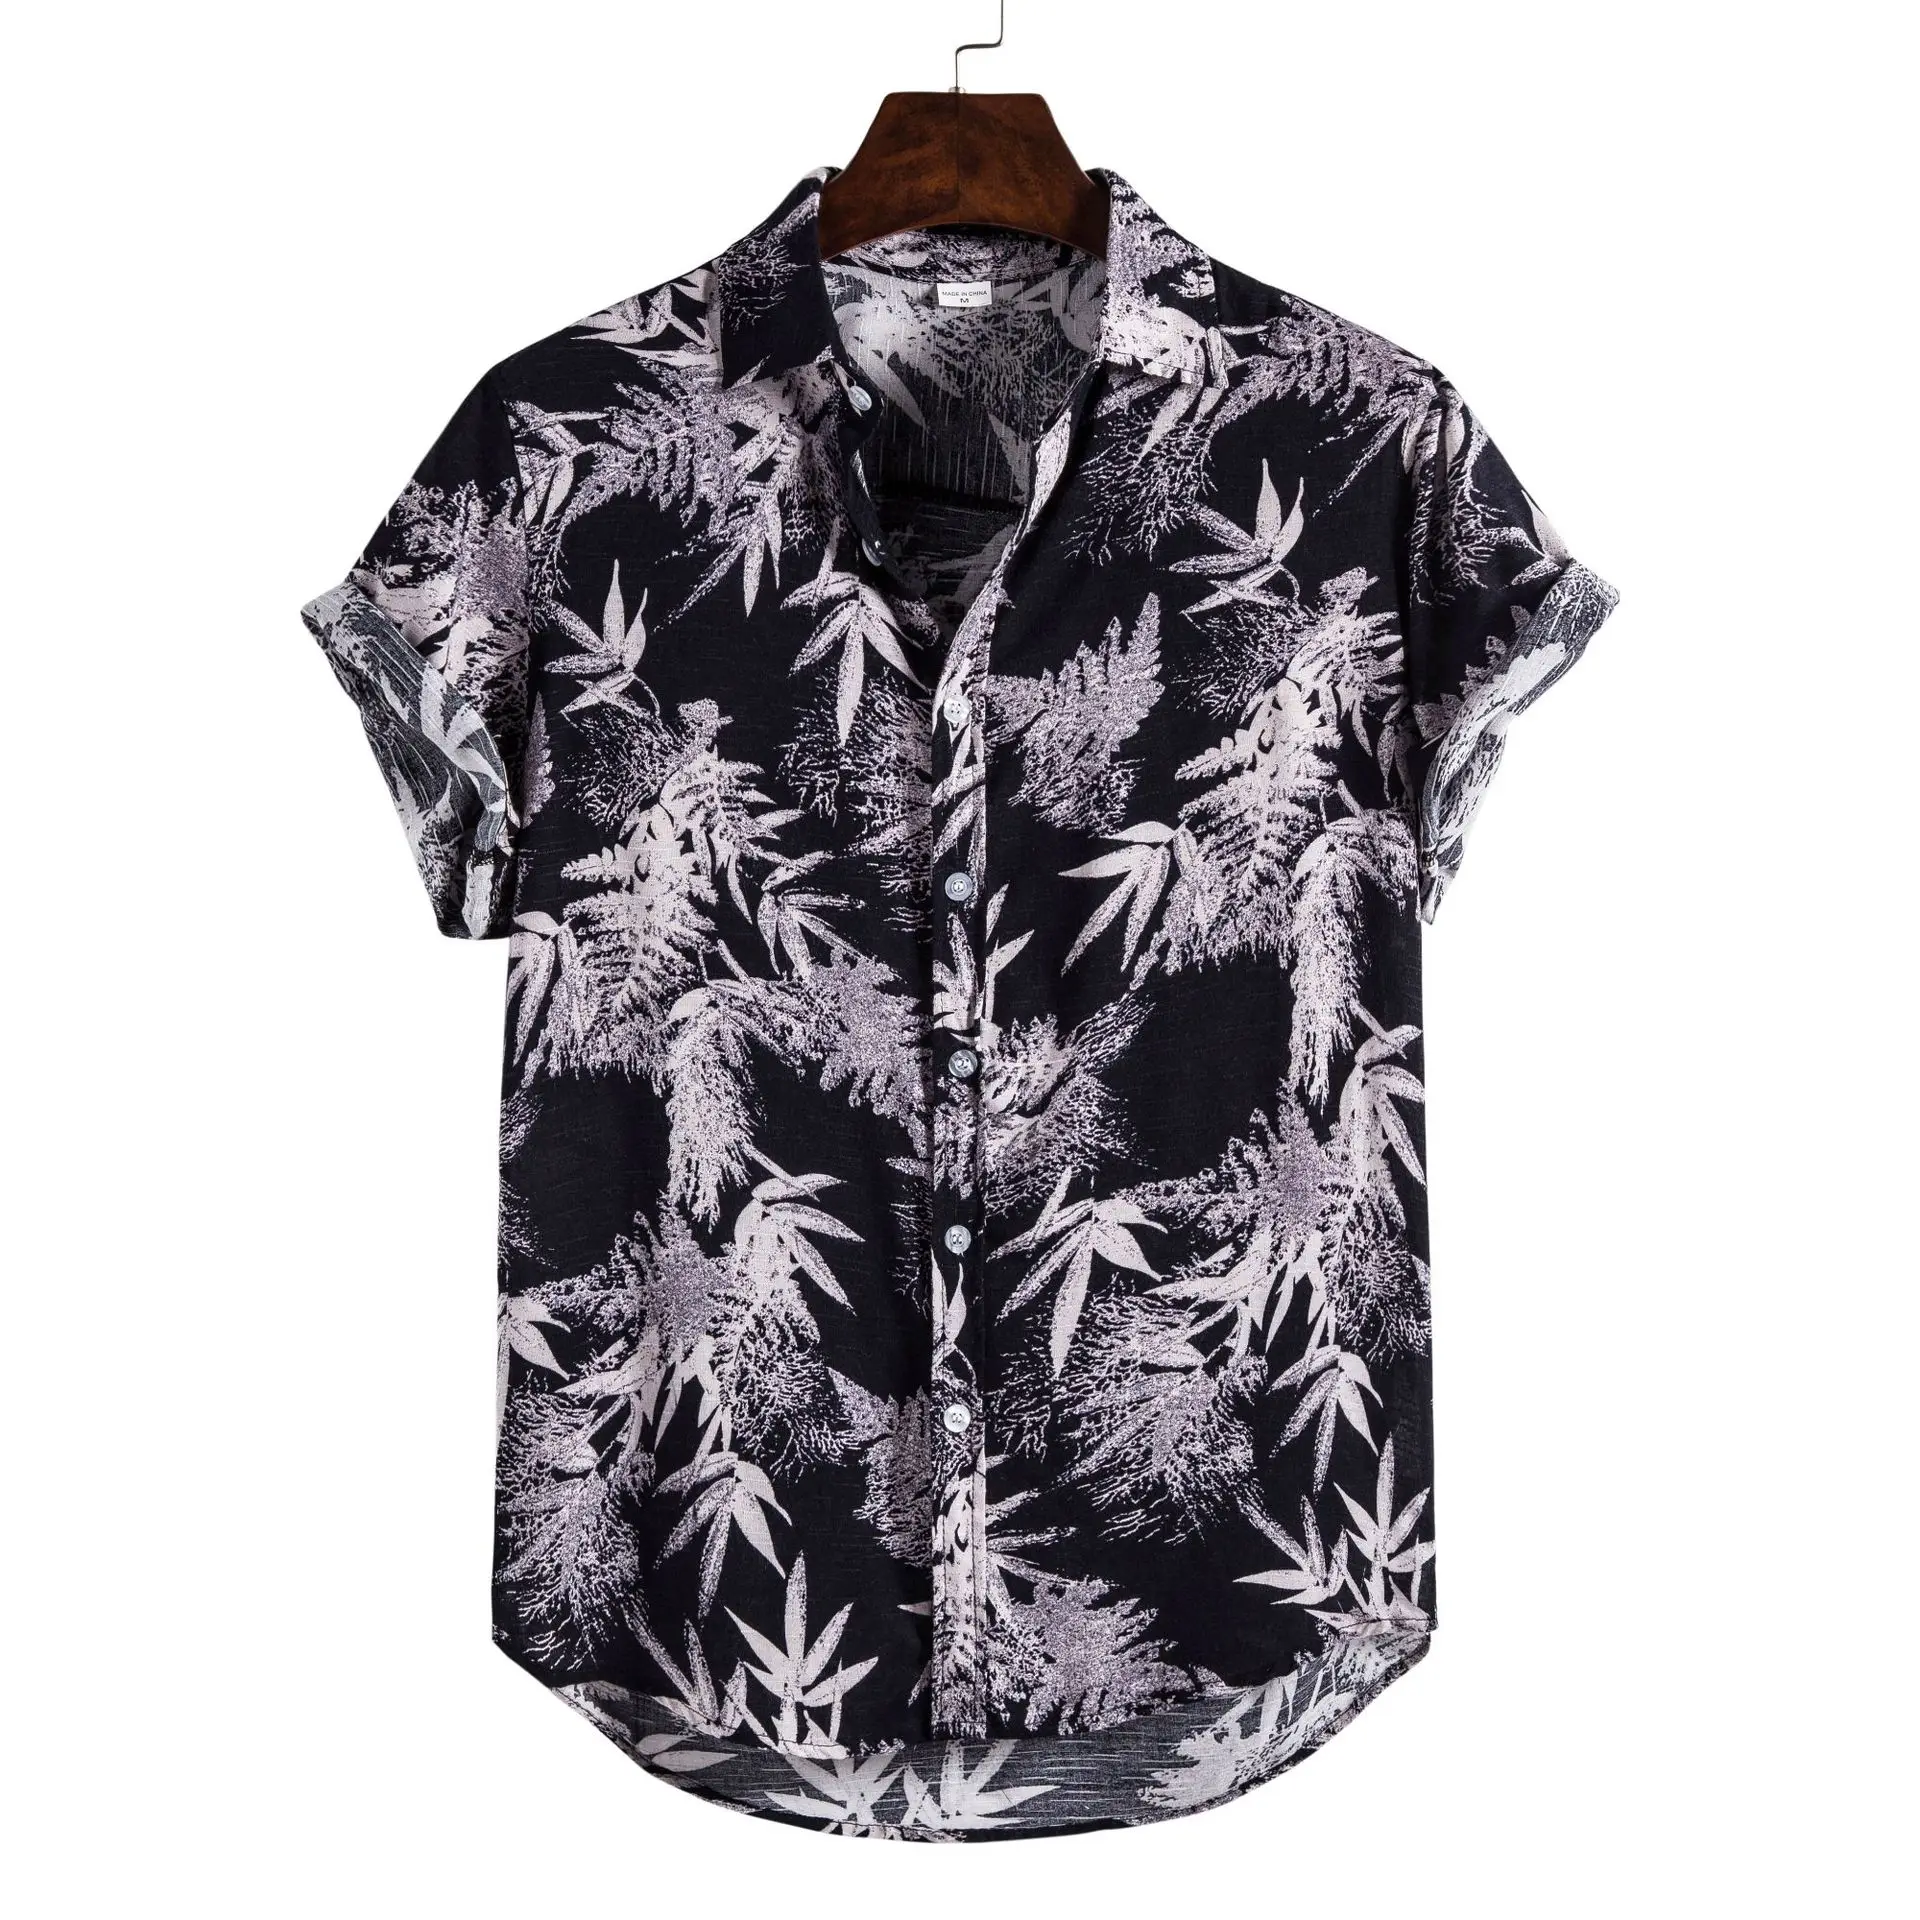 Incerun Homme Floral Chemise Manches Longues Hawaii Parti Tops robe fantaisie Shirt Tee UK